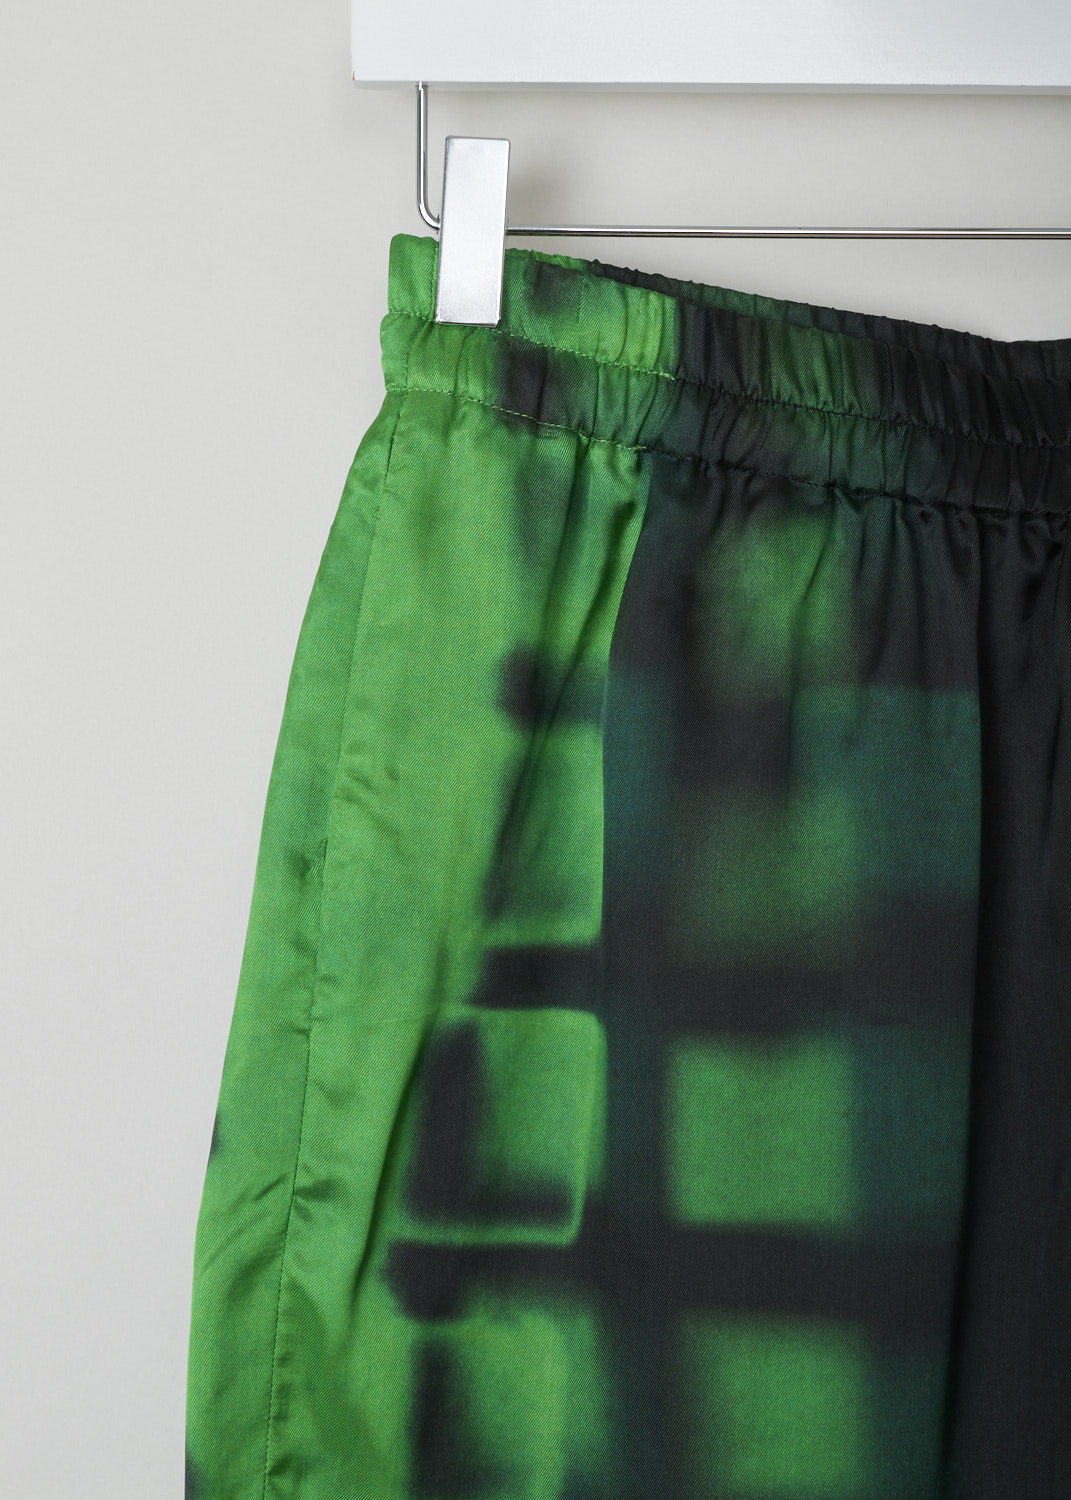 Dries van Noten, Sporty shorts, POMAR_LONG_2068_WW_PANTS_GRE, black green print, detail, Viscose twill shorts, decorated with a graphic print coloured in blue, green and a splash of purple. Featuring an elastic waistband with a drawstring. Furthermore, this model comes with a high-waist and loose fit, concealed pockets can be found on the side seam and has a single jetted pocket on the back.